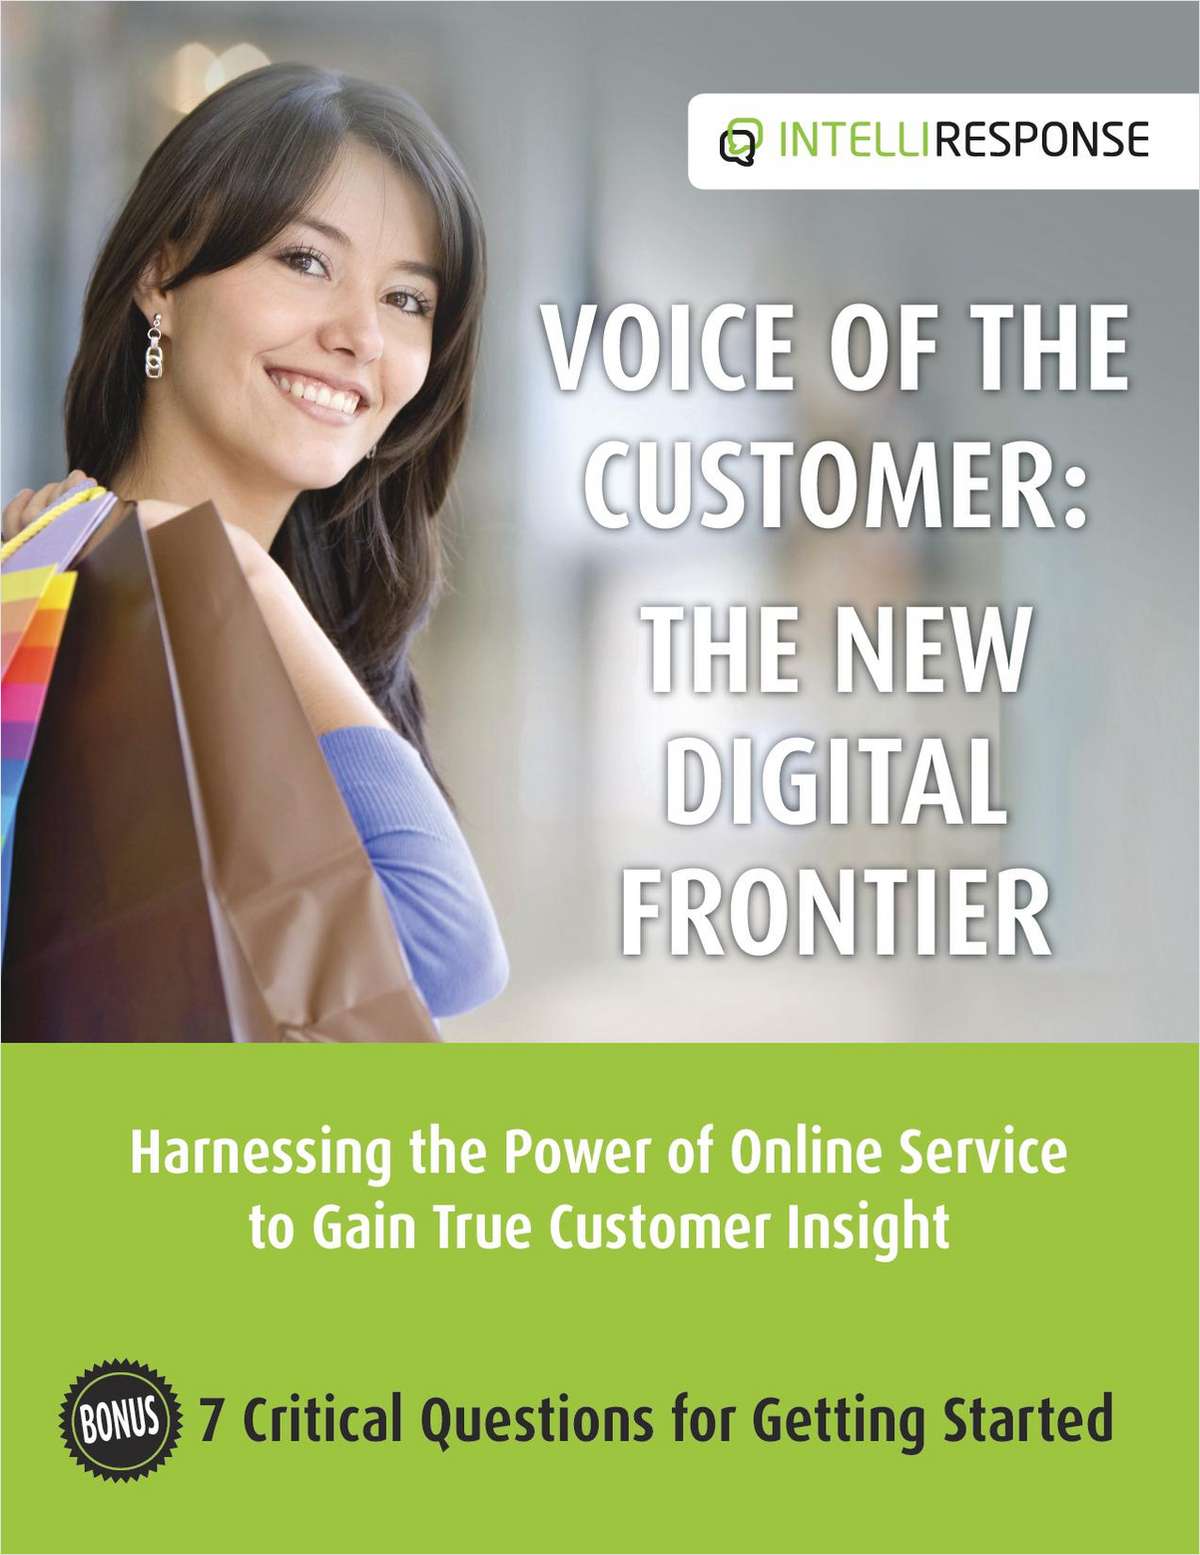 Voice of the Customer: The New Digital Frontier